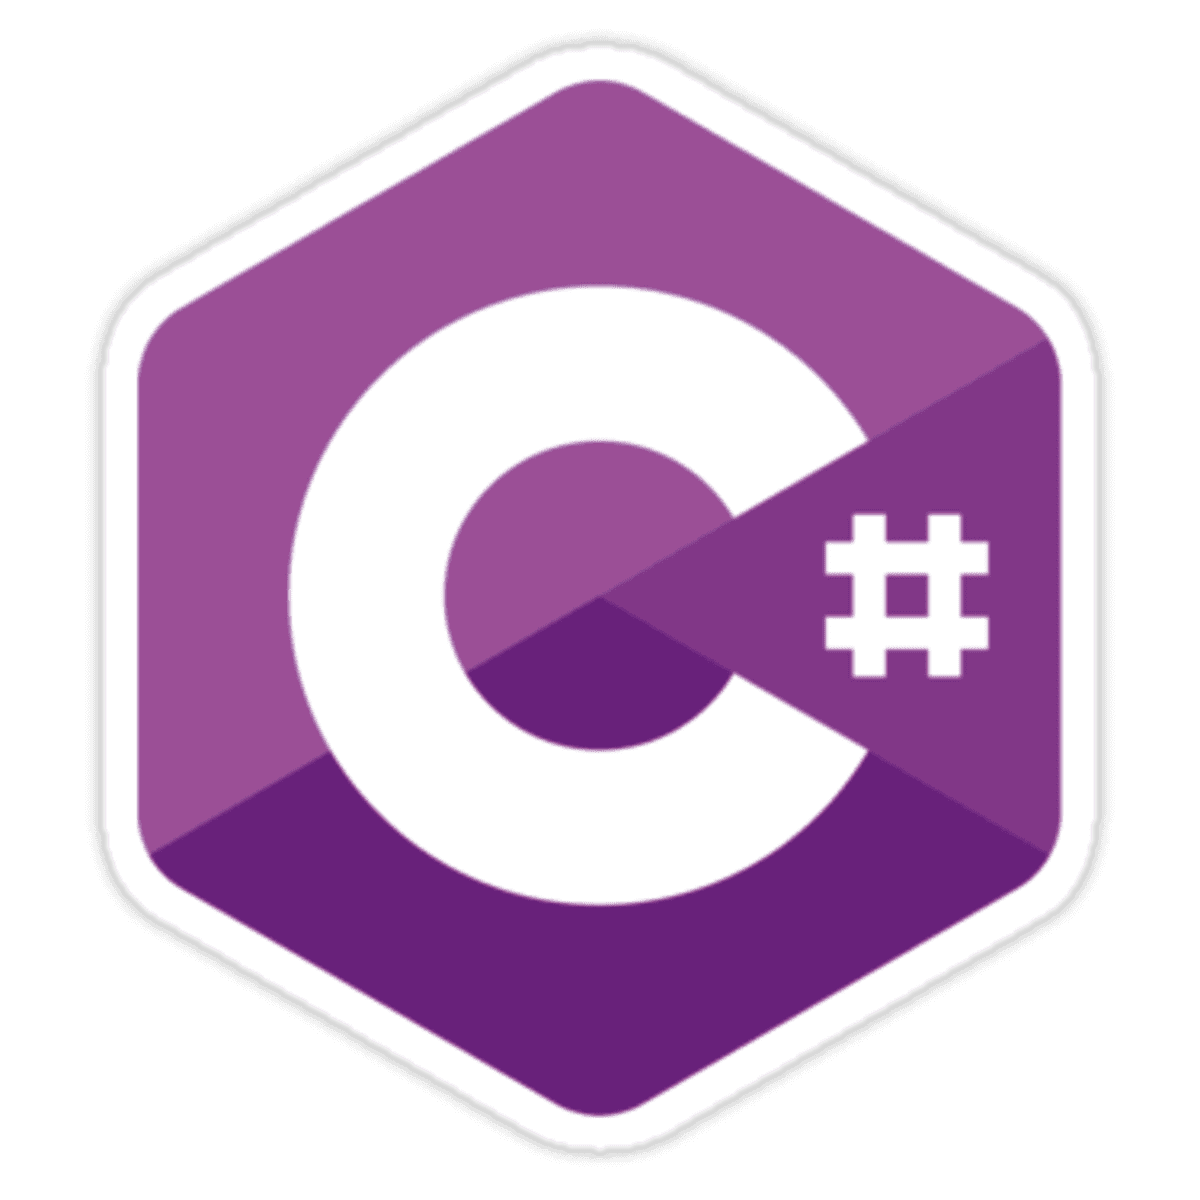 C++ Function Overloading Examples for Interview - Owlcation